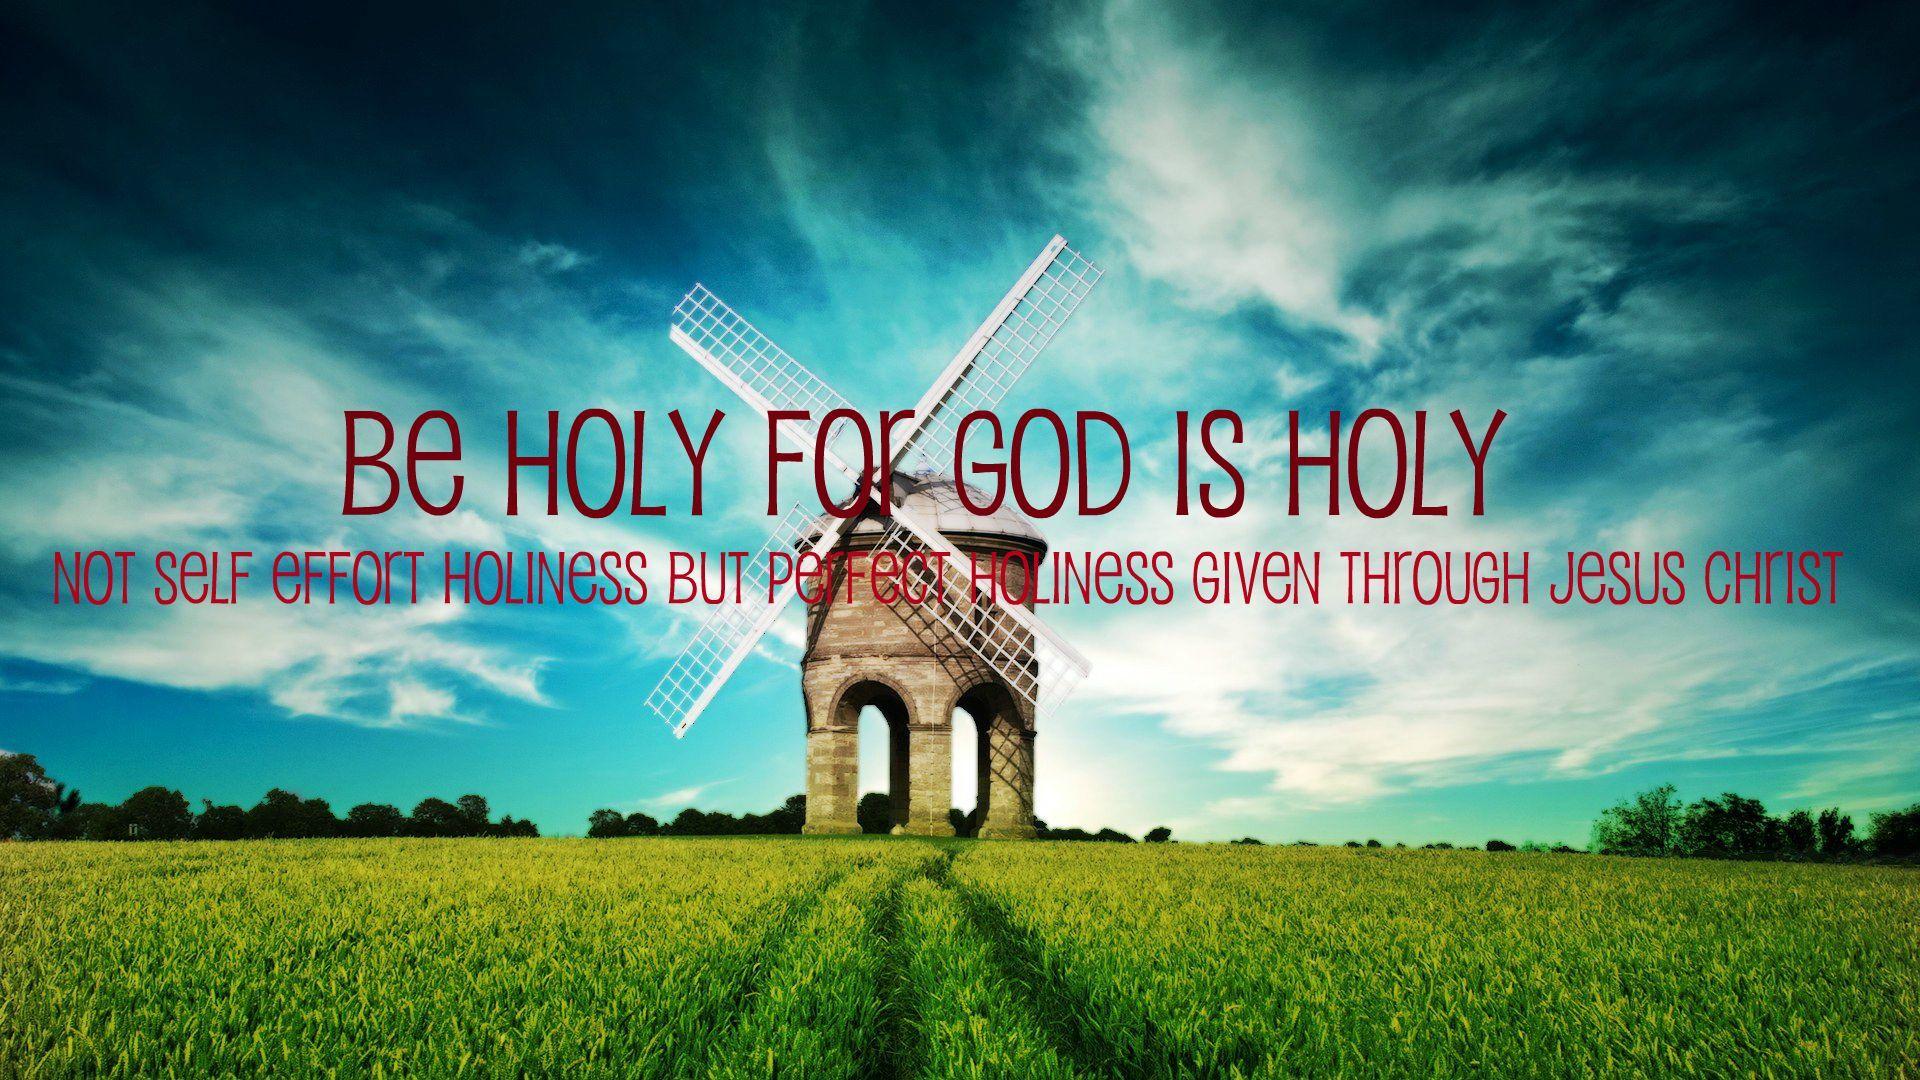 Be Holy, For God is Holy